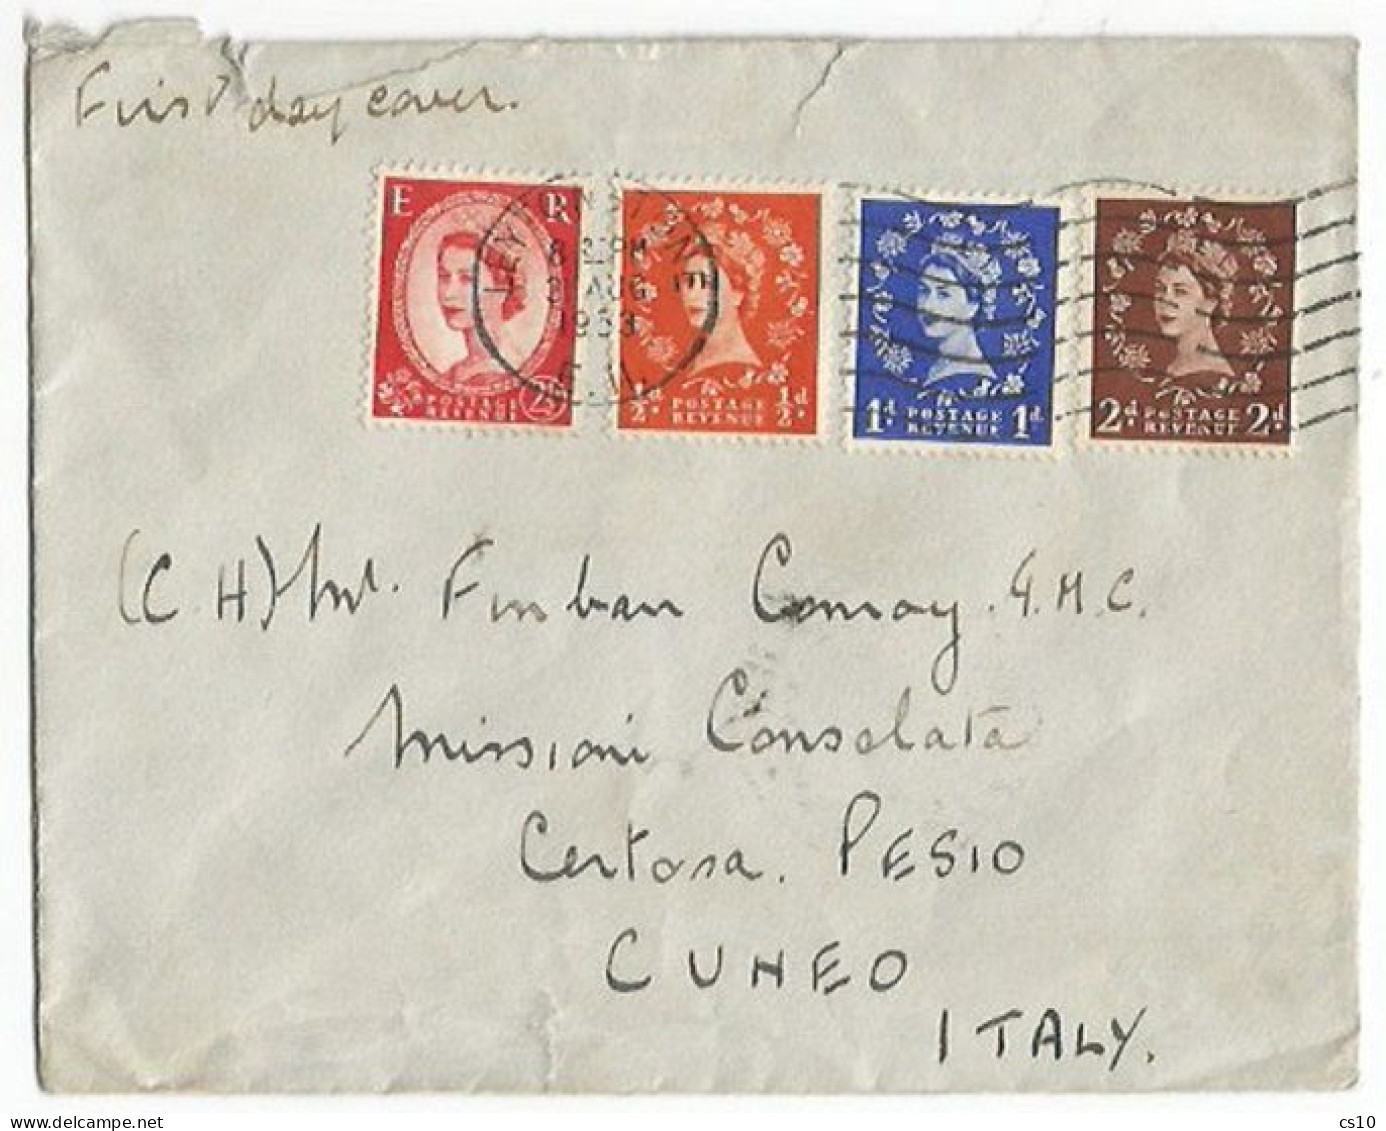 UK Britain QE2 Wilding FDC 4v Regular Issue Sent From Leytonstone 31aug1953 To Italy - Covers & Documents